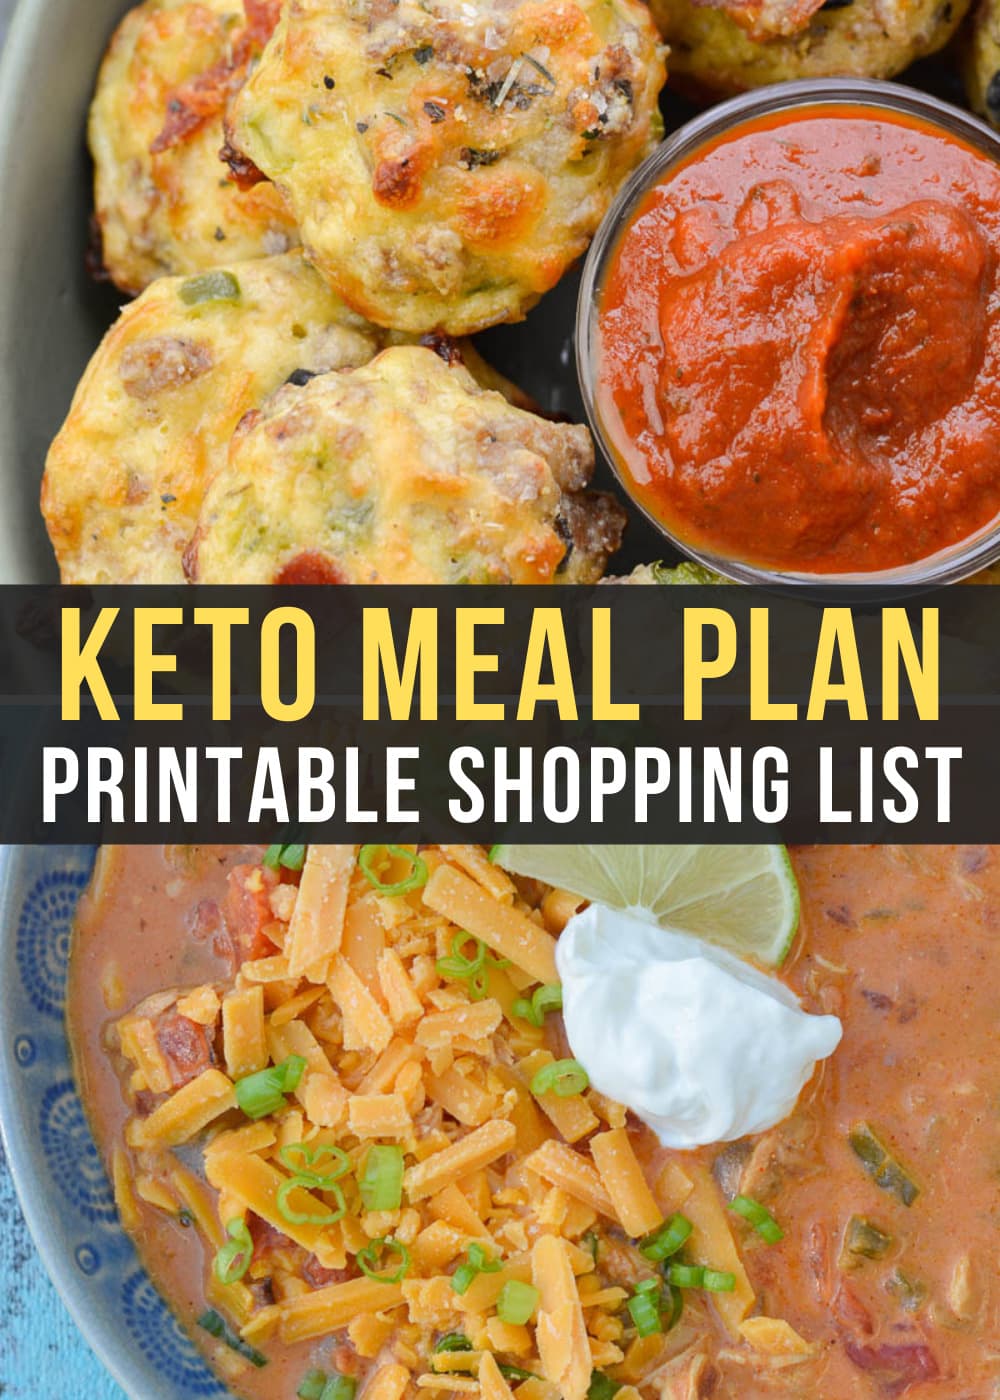 Enjoy delicious low carb meals like Supreme Pizza Bites and Cheesy Chicken Enchilada Soup in Week 26 of my Easy Keto Meal Plan!